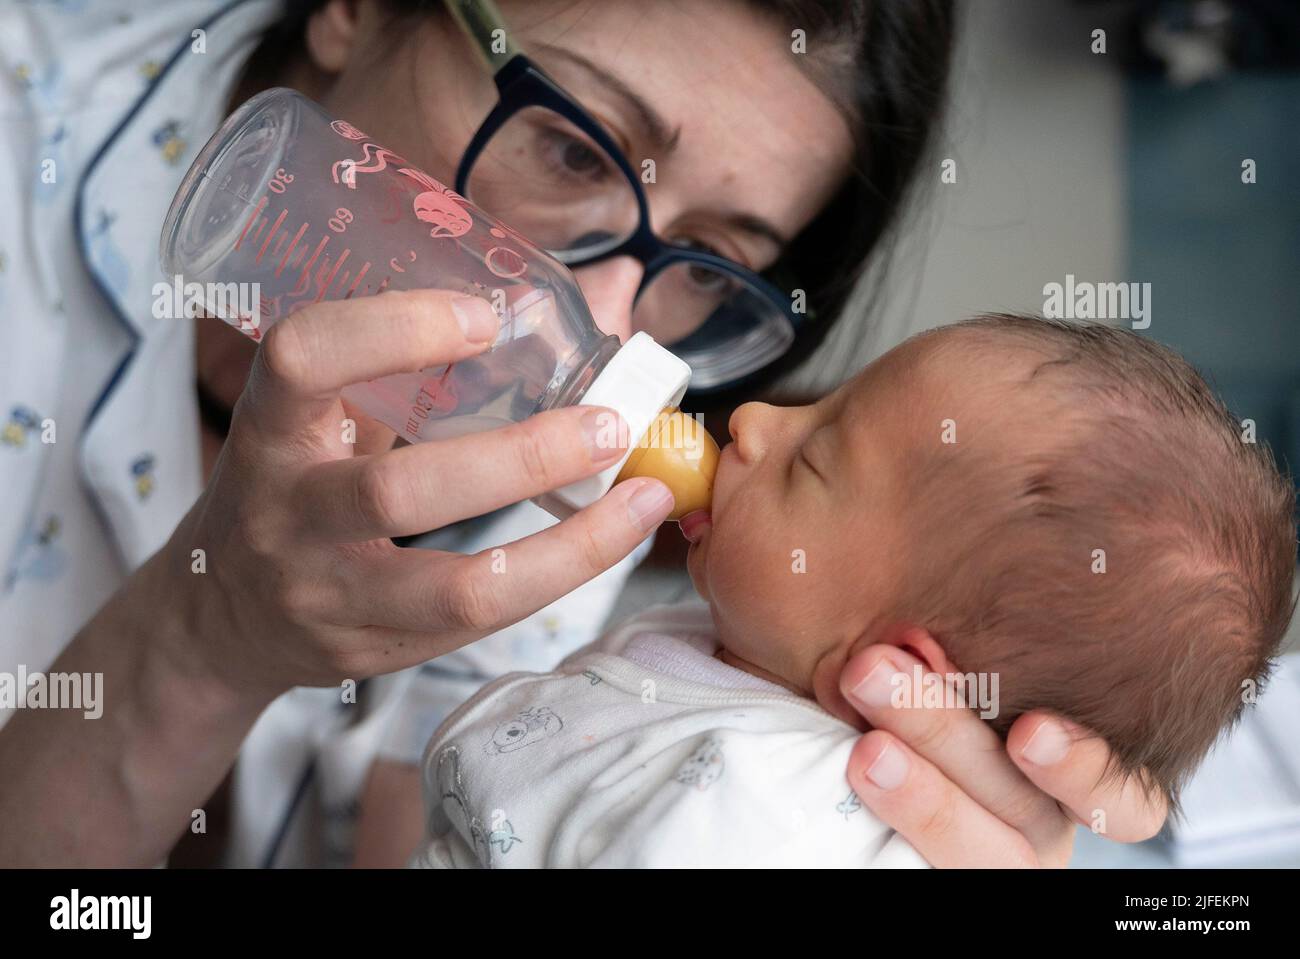 Young woman feeding a newborn premature baby with a nursing bottle Stock Photo